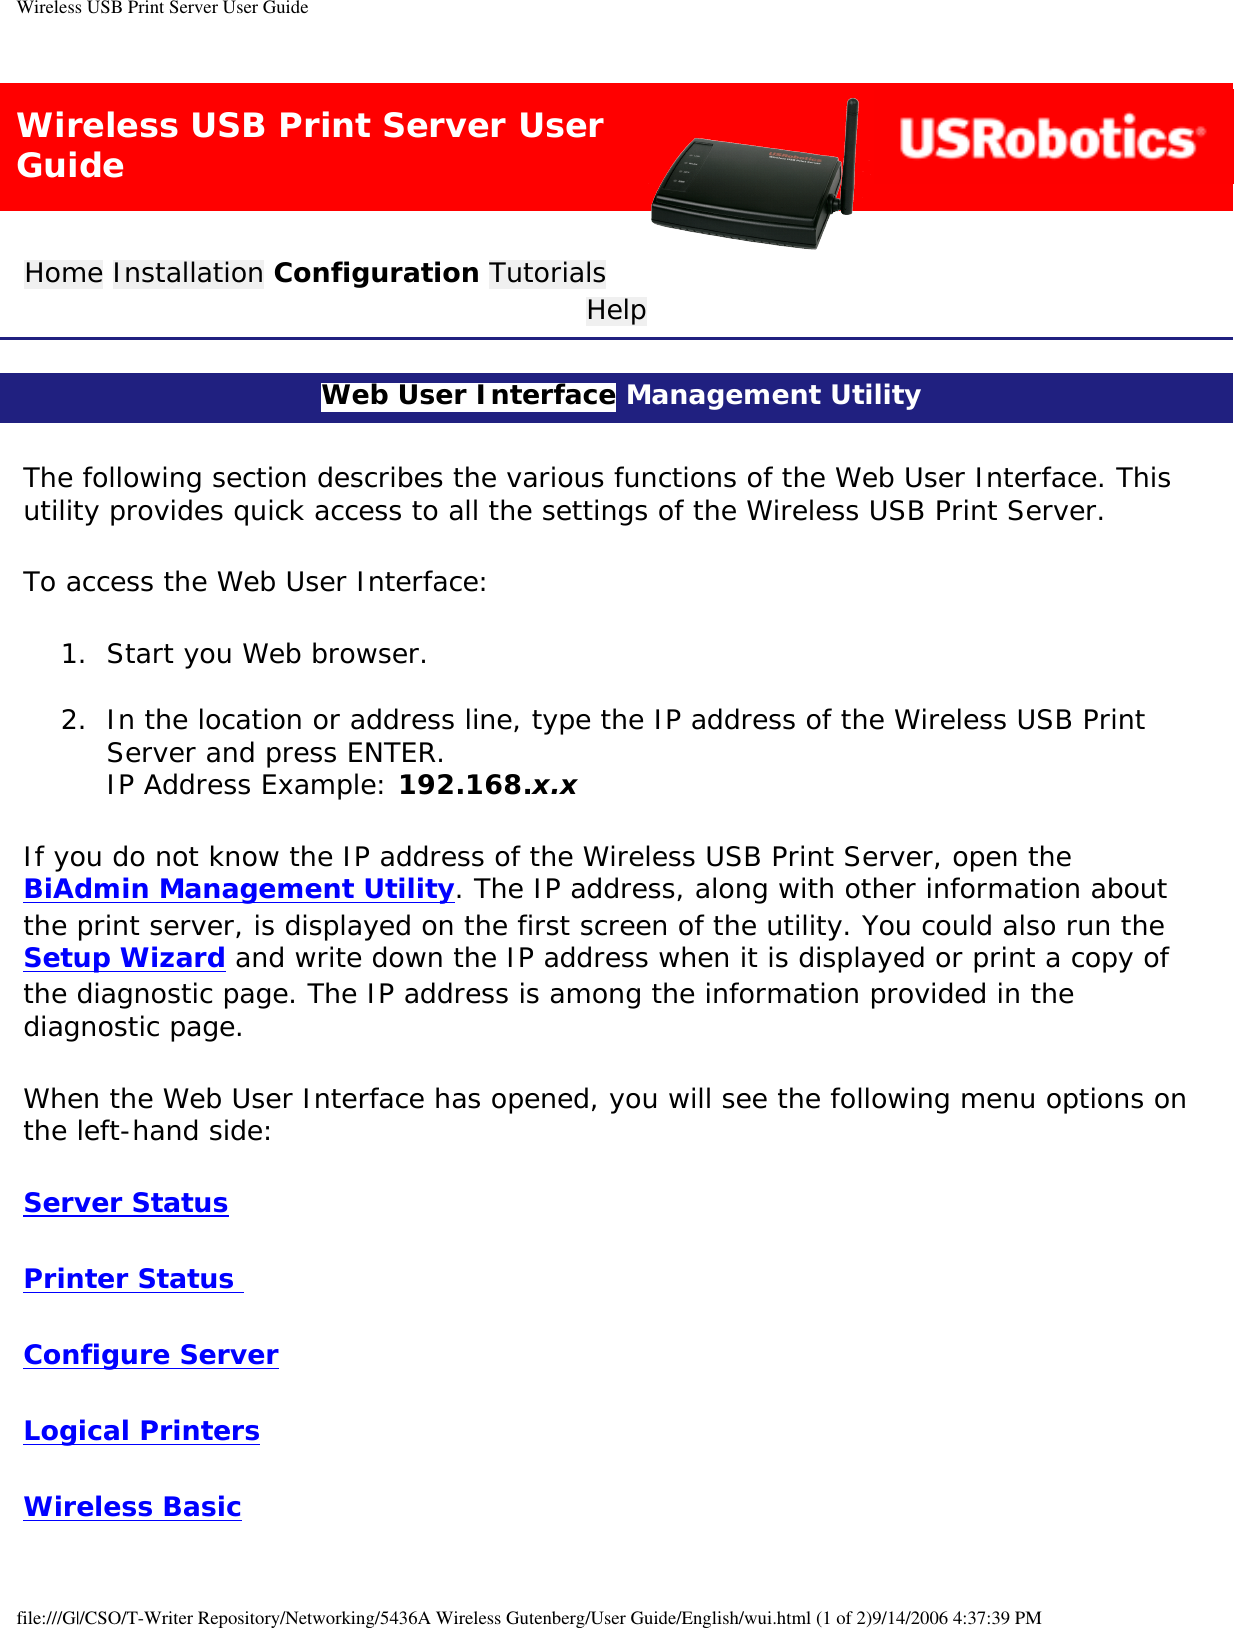 Wireless USB Print Server User GuideWireless USB Print Server User GuideHome Installation Configuration Tutorials Help Web User Interface Management Utility The following section describes the various functions of the Web User Interface. This utility provides quick access to all the settings of the Wireless USB Print Server. To access the Web User Interface:1.  Start you Web browser. 2.  In the location or address line, type the IP address of the Wireless USB Print Server and press ENTER.  IP Address Example: 192.168.x.x If you do not know the IP address of the Wireless USB Print Server, open the BiAdmin Management Utility. The IP address, along with other information about the print server, is displayed on the first screen of the utility. You could also run the Setup Wizard and write down the IP address when it is displayed or print a copy of the diagnostic page. The IP address is among the information provided in the diagnostic page. When the Web User Interface has opened, you will see the following menu options on the left-hand side: Server StatusPrinter Status Configure ServerLogical PrintersWireless Basicfile:///G|/CSO/T-Writer Repository/Networking/5436A Wireless Gutenberg/User Guide/English/wui.html (1 of 2)9/14/2006 4:37:39 PM